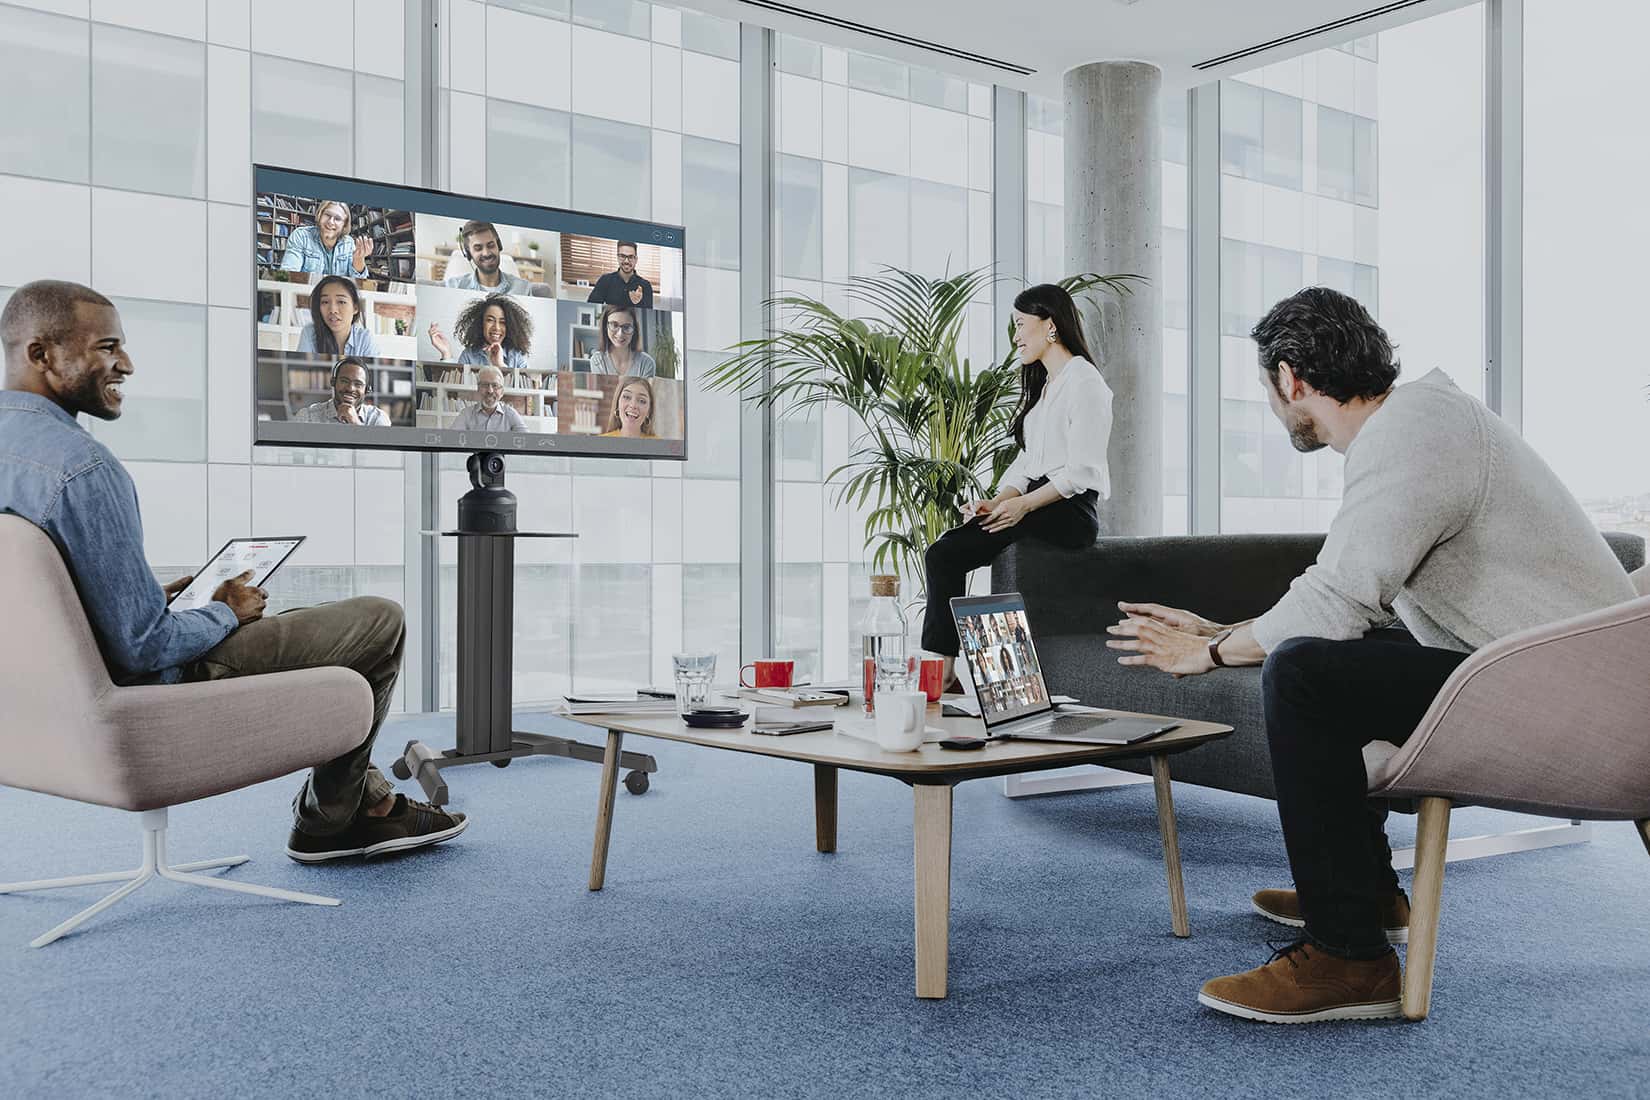 The Collaboration Space Blog: Support the Transition to Hybrid Work With Robust AV Solutions for Everyone with Legrand AV